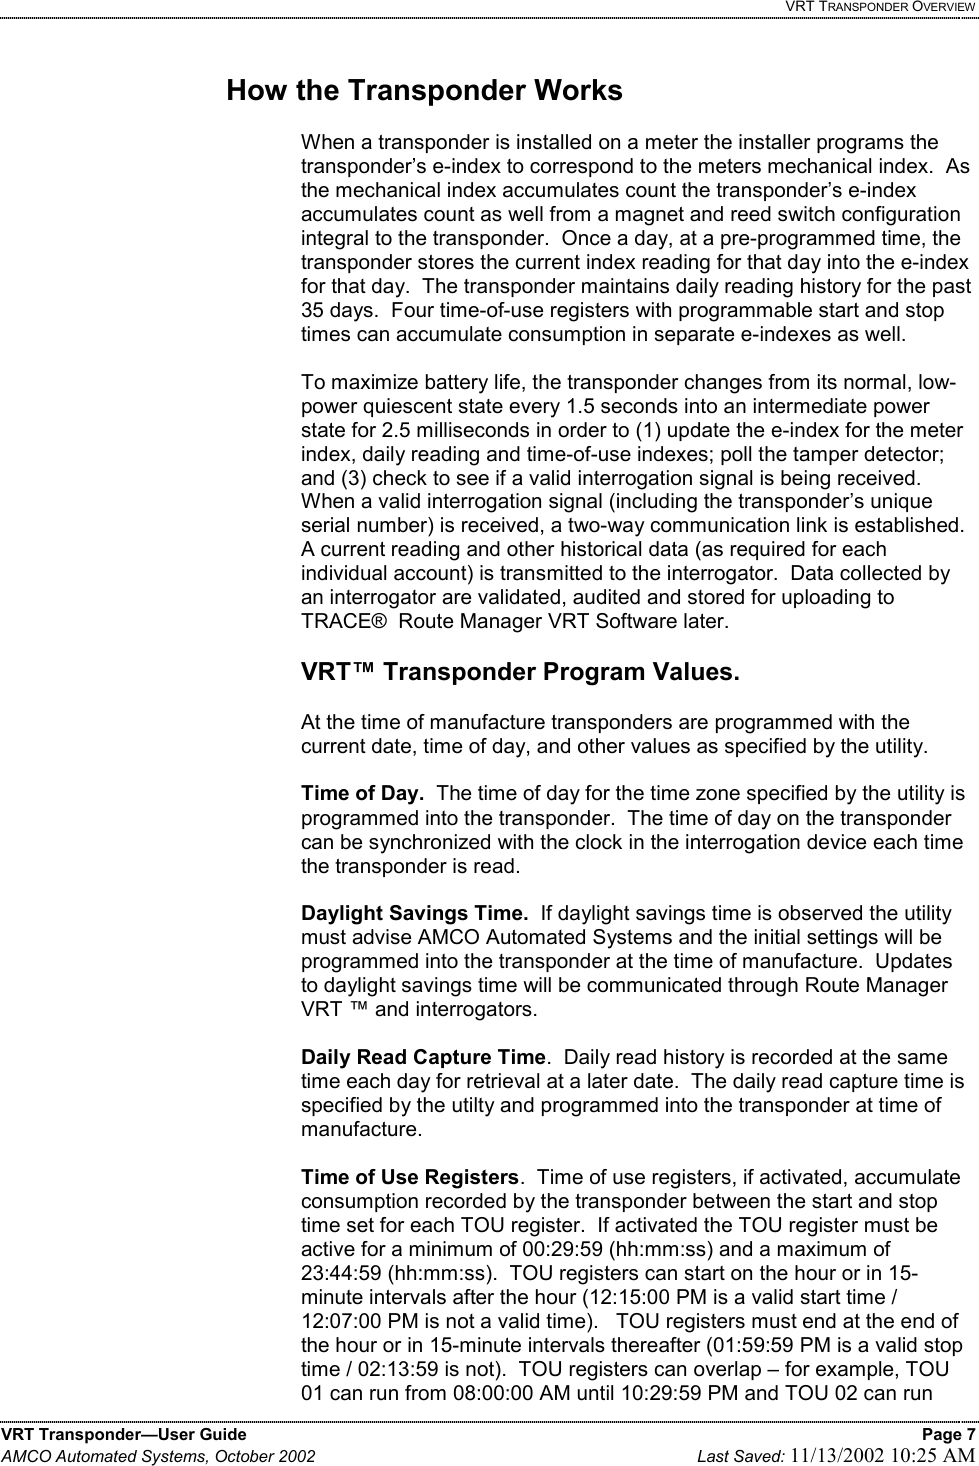   VRT TRANSPONDER OVERVIEW VRT Transponder—User Guide    Page 7 AMCO Automated Systems, October 2002    Last Saved: 11/13/2002 10:25 AM   How the Transponder Works  When a transponder is installed on a meter the installer programs the transponder’s e-index to correspond to the meters mechanical index.  As the mechanical index accumulates count the transponder’s e-index accumulates count as well from a magnet and reed switch configuration integral to the transponder.  Once a day, at a pre-programmed time, the transponder stores the current index reading for that day into the e-index for that day.  The transponder maintains daily reading history for the past 35 days.  Four time-of-use registers with programmable start and stop times can accumulate consumption in separate e-indexes as well.  To maximize battery life, the transponder changes from its normal, low-power quiescent state every 1.5 seconds into an intermediate power state for 2.5 milliseconds in order to (1) update the e-index for the meter index, daily reading and time-of-use indexes; poll the tamper detector; and (3) check to see if a valid interrogation signal is being received.  When a valid interrogation signal (including the transponder’s unique serial number) is received, a two-way communication link is established.  A current reading and other historical data (as required for each individual account) is transmitted to the interrogator.  Data collected by an interrogator are validated, audited and stored for uploading to TRACE®  Route Manager VRT Software later.   VRT™ Transponder Program Values.  At the time of manufacture transponders are programmed with the current date, time of day, and other values as specified by the utility.    Time of Day.  The time of day for the time zone specified by the utility is programmed into the transponder.  The time of day on the transponder can be synchronized with the clock in the interrogation device each time the transponder is read.  Daylight Savings Time.  If daylight savings time is observed the utility must advise AMCO Automated Systems and the initial settings will be programmed into the transponder at the time of manufacture.  Updates to daylight savings time will be communicated through Route Manager VRT ™ and interrogators.  Daily Read Capture Time.  Daily read history is recorded at the same time each day for retrieval at a later date.  The daily read capture time is specified by the utilty and programmed into the transponder at time of manufacture.  Time of Use Registers.  Time of use registers, if activated, accumulate consumption recorded by the transponder between the start and stop time set for each TOU register.  If activated the TOU register must be active for a minimum of 00:29:59 (hh:mm:ss) and a maximum of 23:44:59 (hh:mm:ss).  TOU registers can start on the hour or in 15-minute intervals after the hour (12:15:00 PM is a valid start time / 12:07:00 PM is not a valid time).   TOU registers must end at the end of the hour or in 15-minute intervals thereafter (01:59:59 PM is a valid stop time / 02:13:59 is not).  TOU registers can overlap – for example, TOU 01 can run from 08:00:00 AM until 10:29:59 PM and TOU 02 can run 